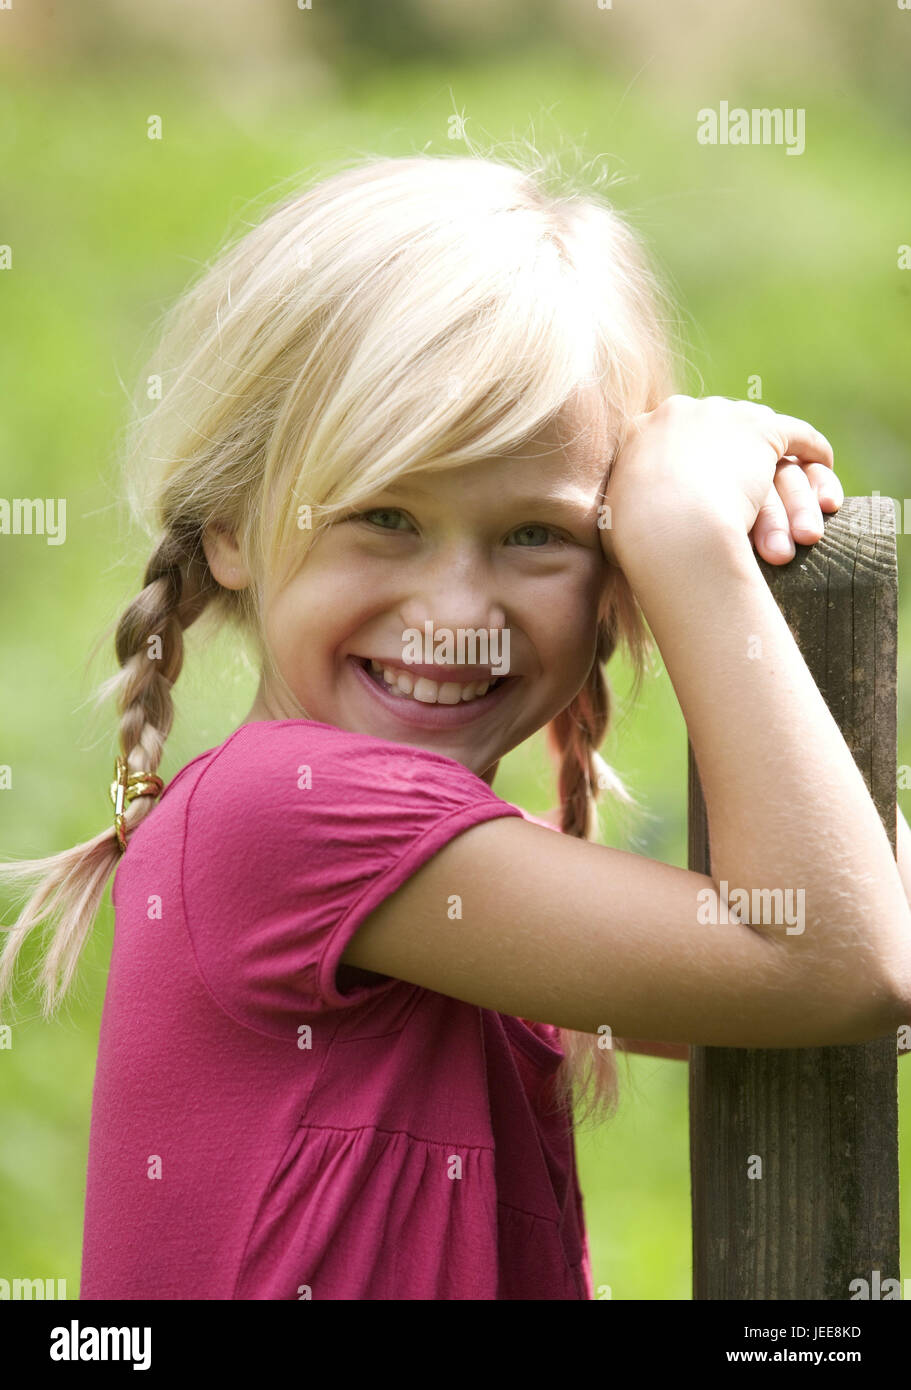 Girls, smile, lean wooden post, portrait, person, child, blond, long-haired, plaits, arms, lean, expression, happily, happily, joy, fun, outside, Stock Photo